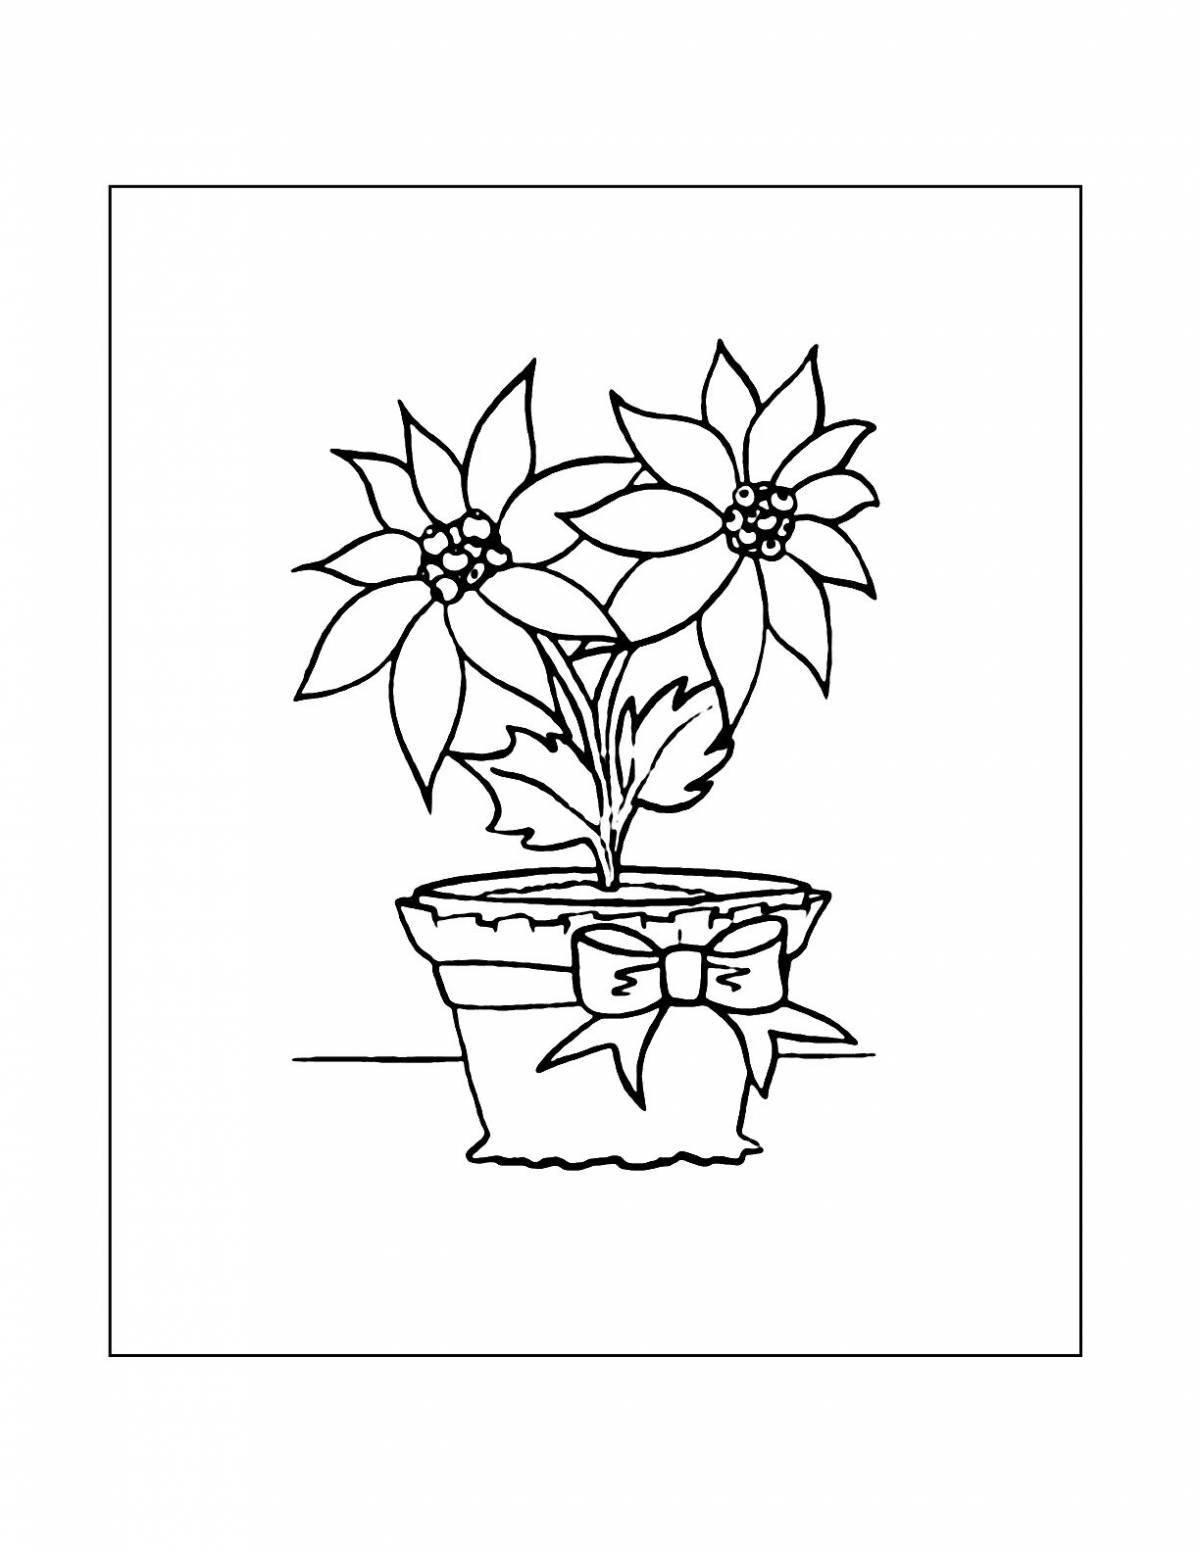 Bright flower in a pot for 3-4 year olds